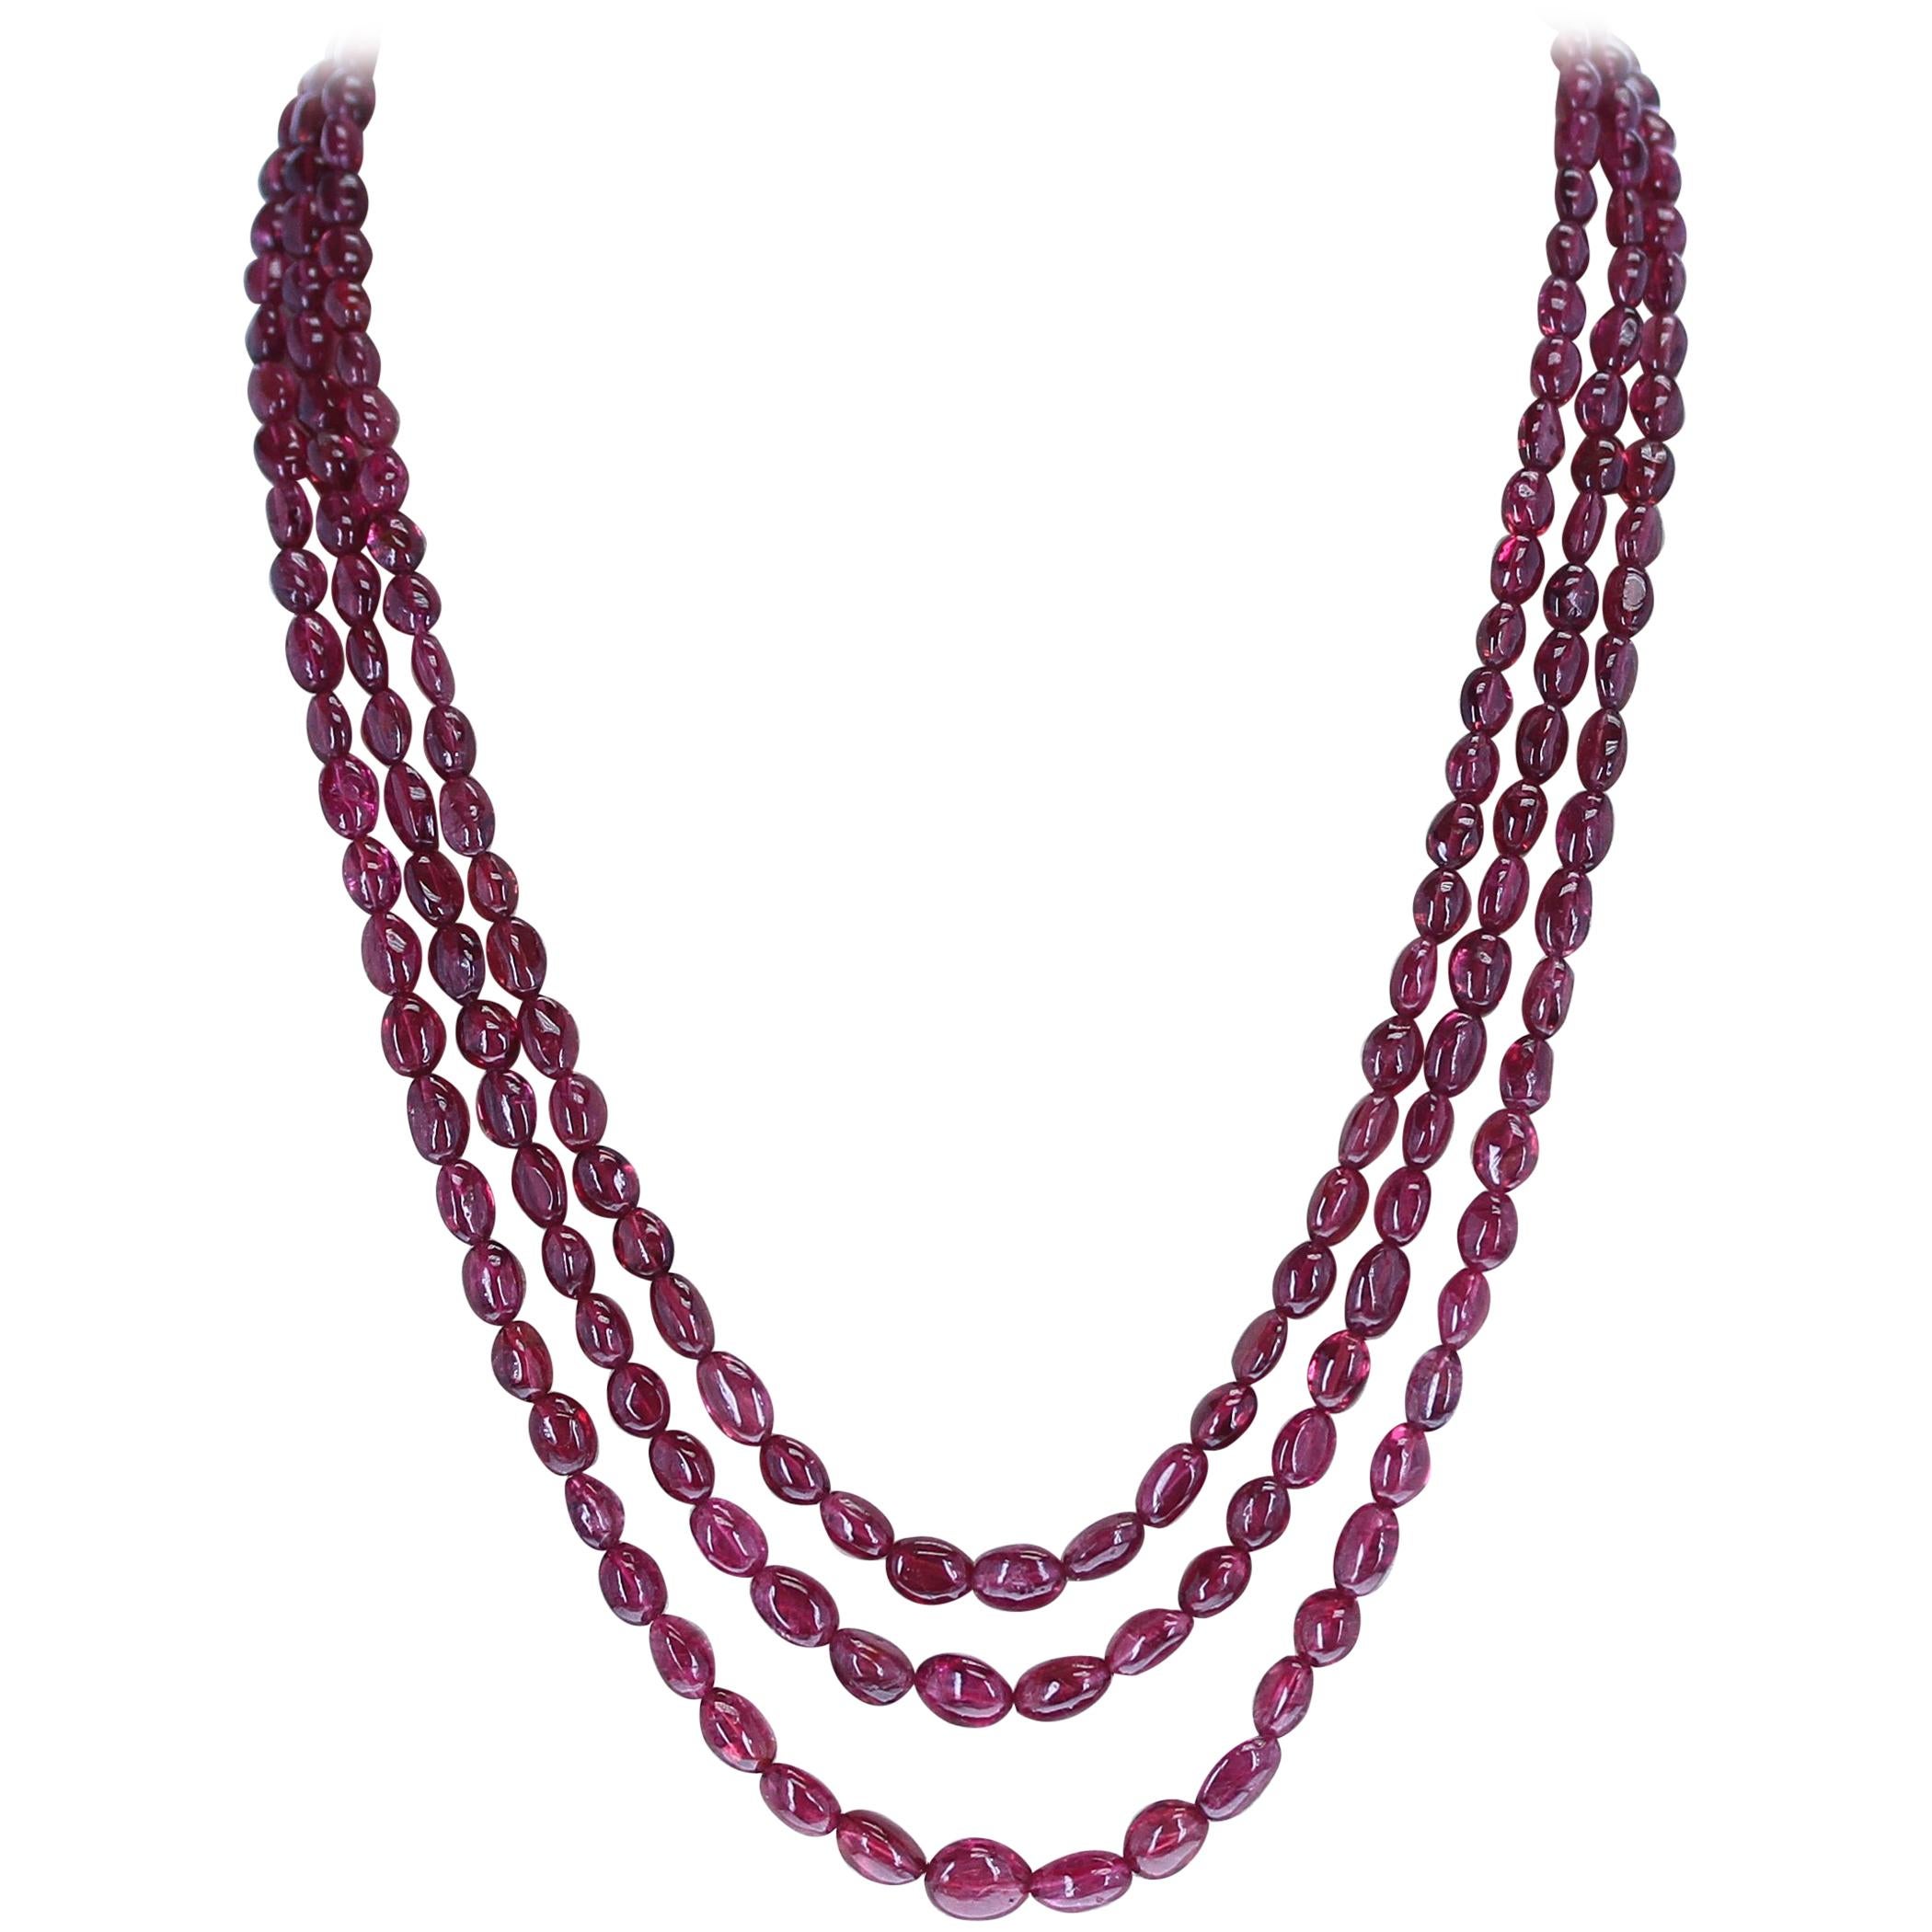 Genuine and Natural Tumbled and Smooth Spinel Beads Necklace, 14 Karat Clasp For Sale